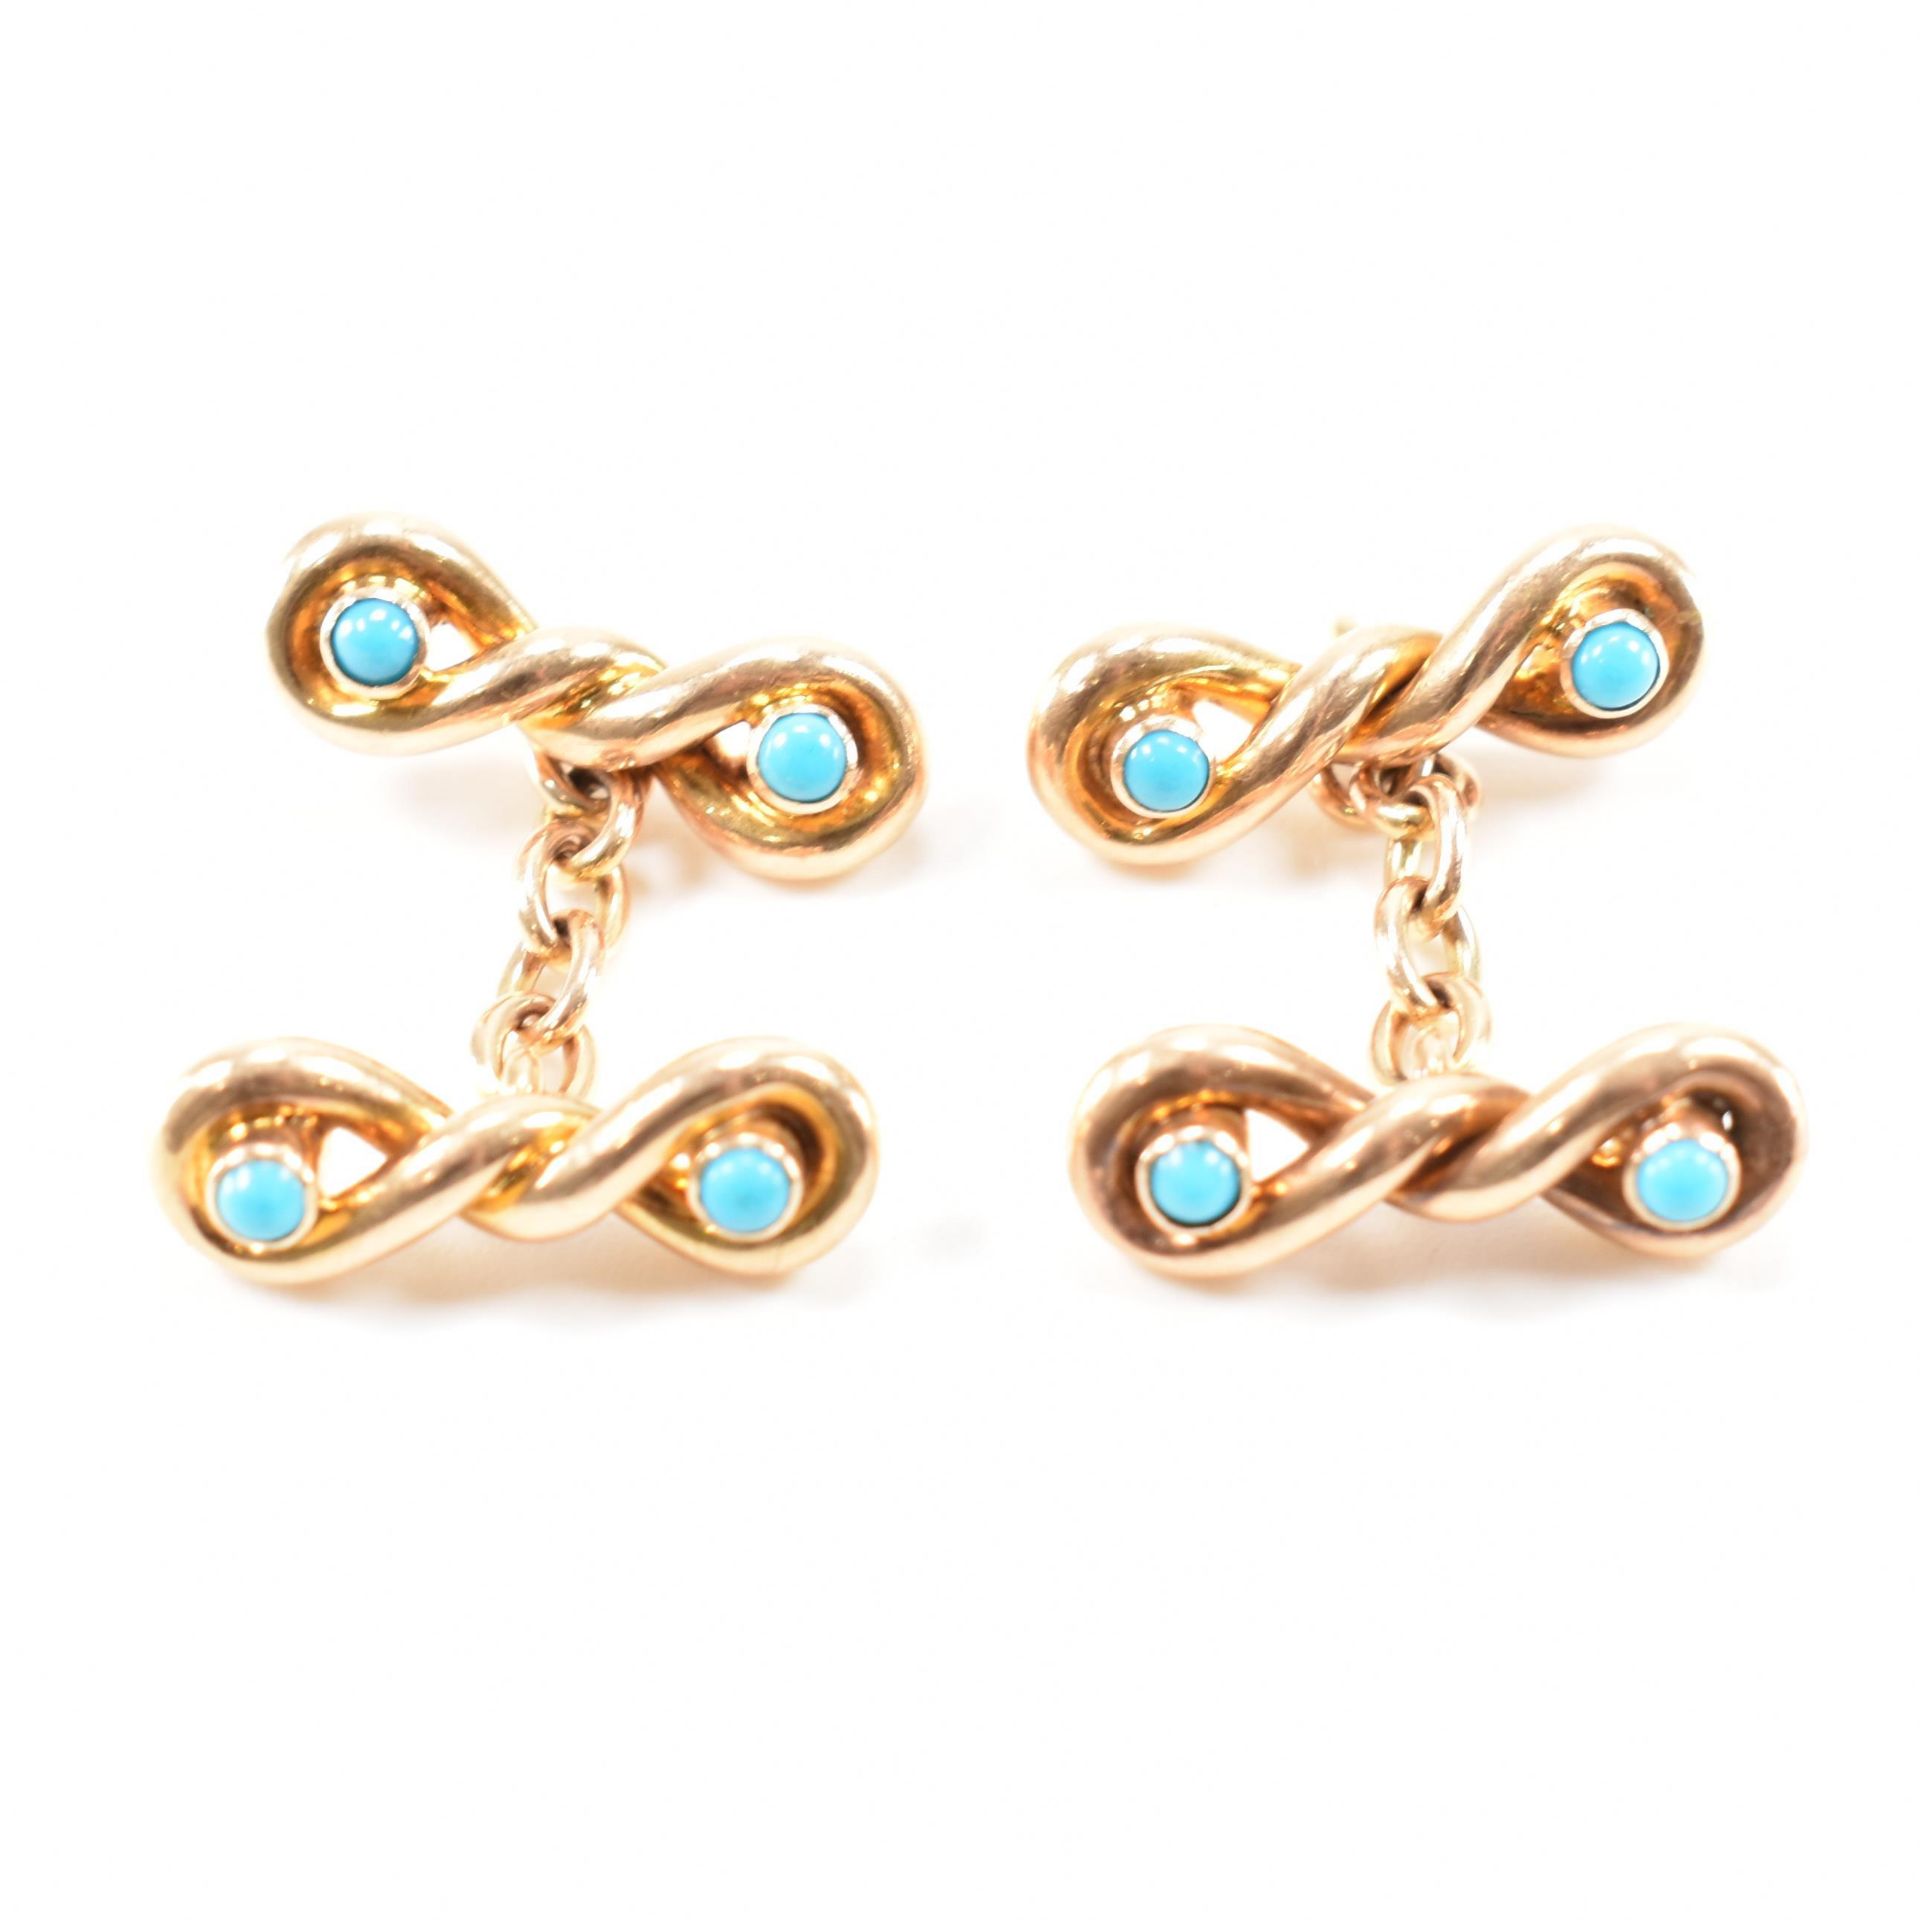 PAIR OF VINTAGE 15CT GOLD & TURQUOISE CUFFLINKS - Image 2 of 5